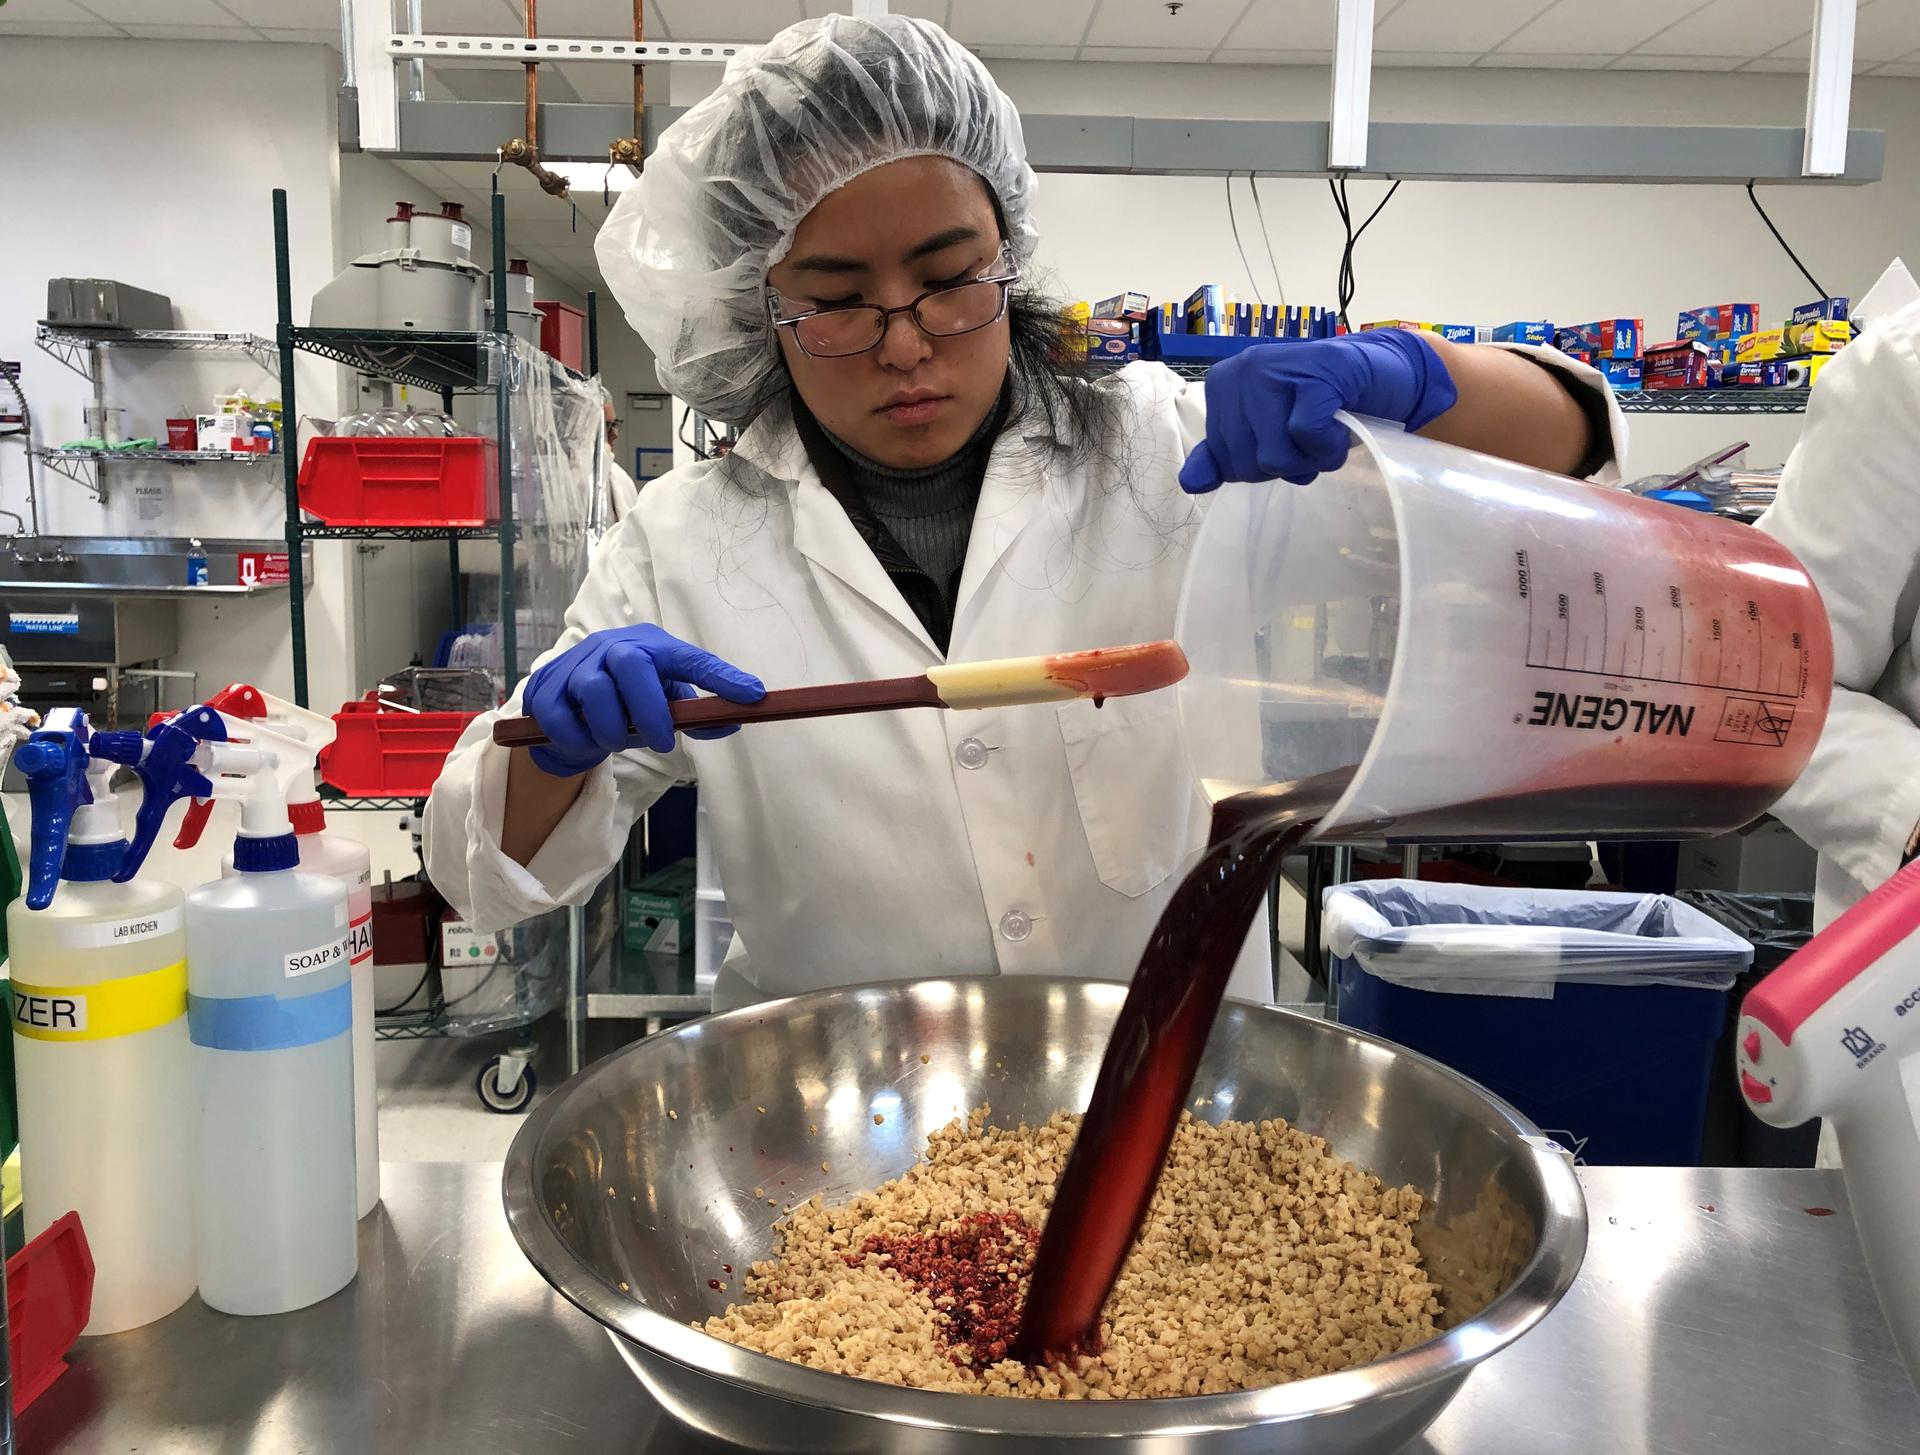 Impossible Foods research technician Alexia Yue pours a heme solution, the key ingredient, into a plant-based mixture for burgers at the company's facility in Redwood City, California. March 26, 2019.